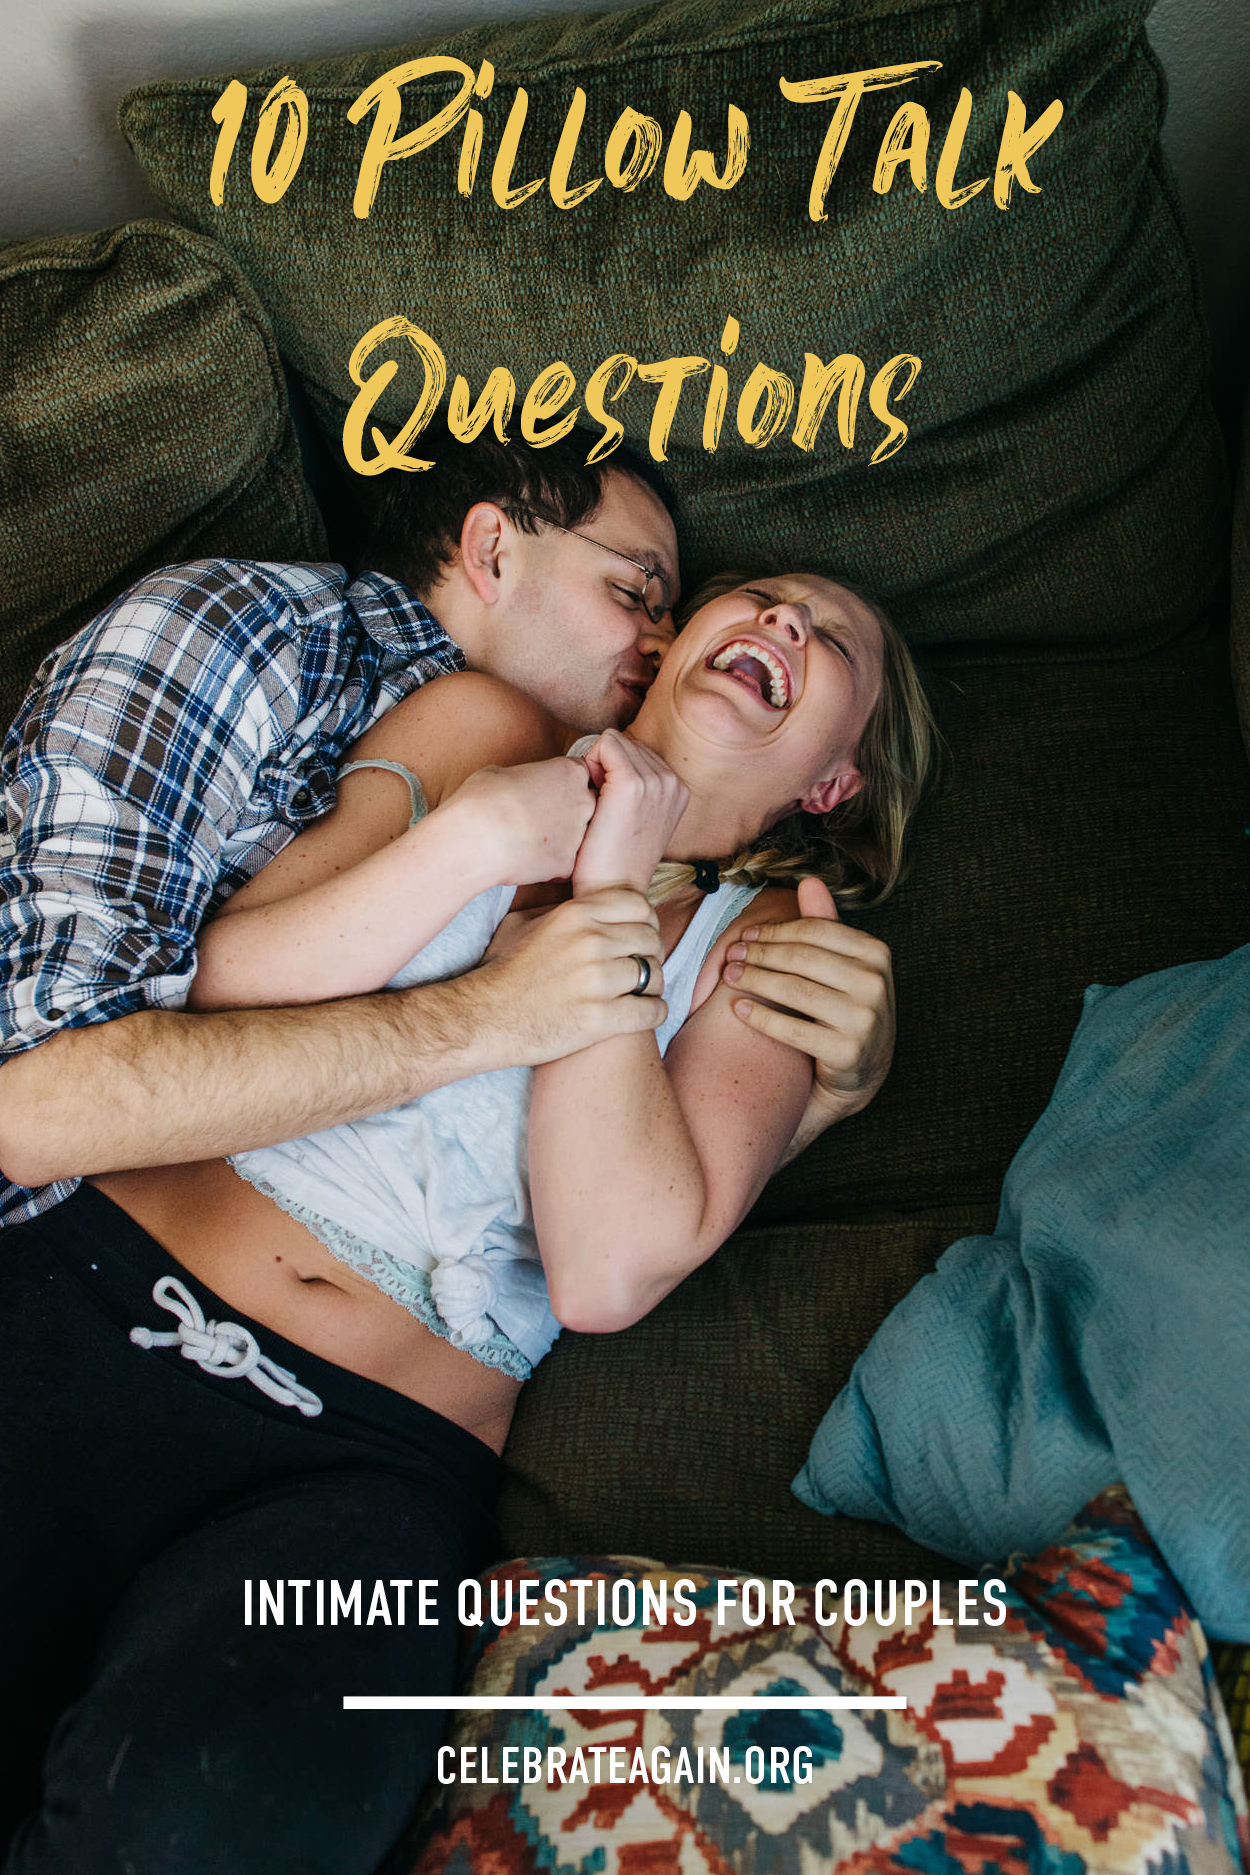 "10 pillow talk questions intimate conversations for couples" text on top of photo of couple having a pillow fight on their couch